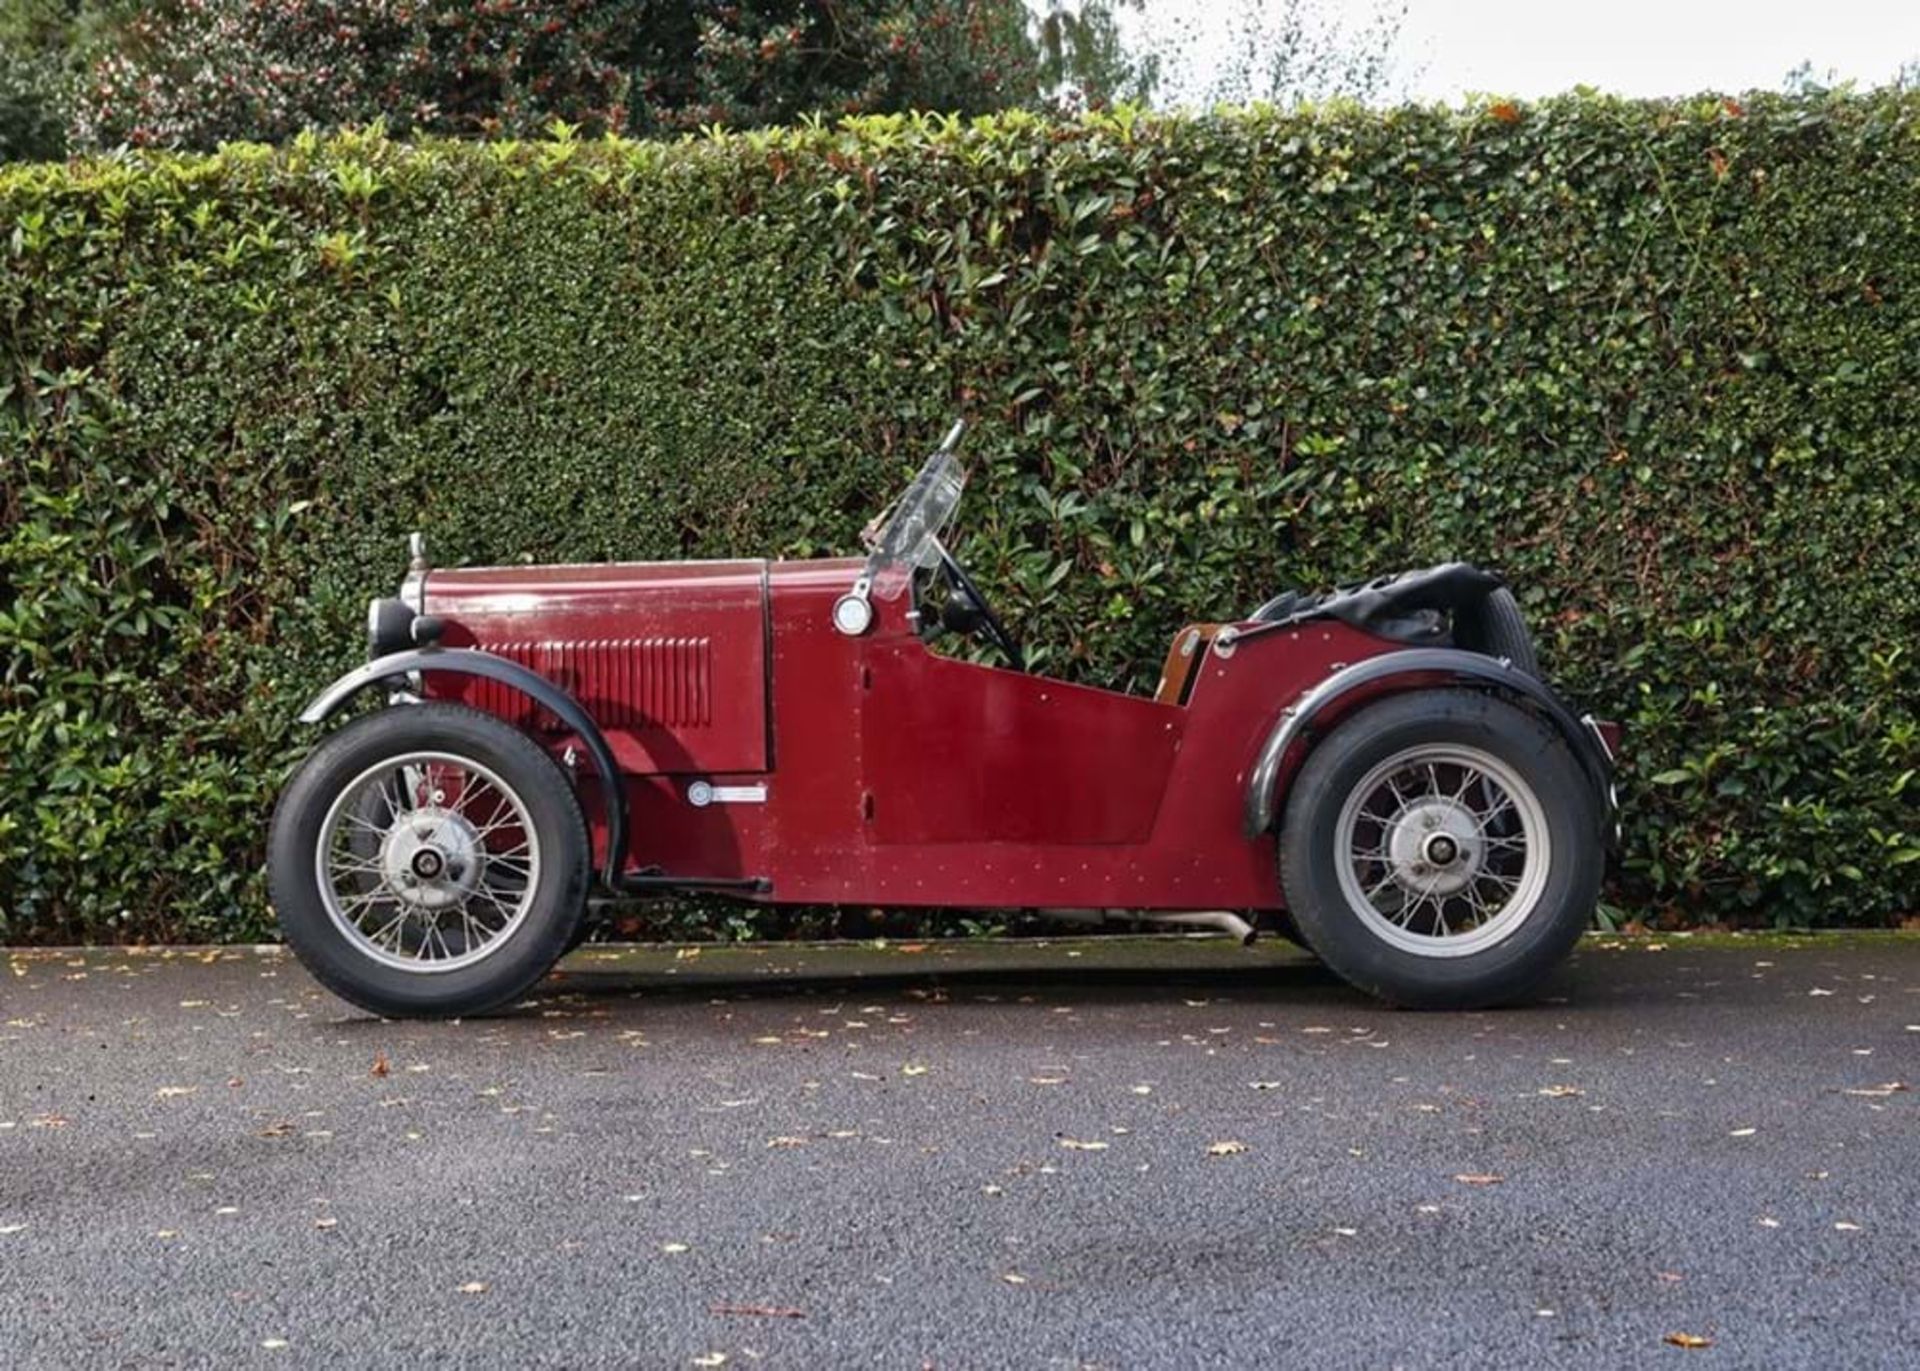 1937 Austin Seven Two-Seater Special - Image 2 of 10